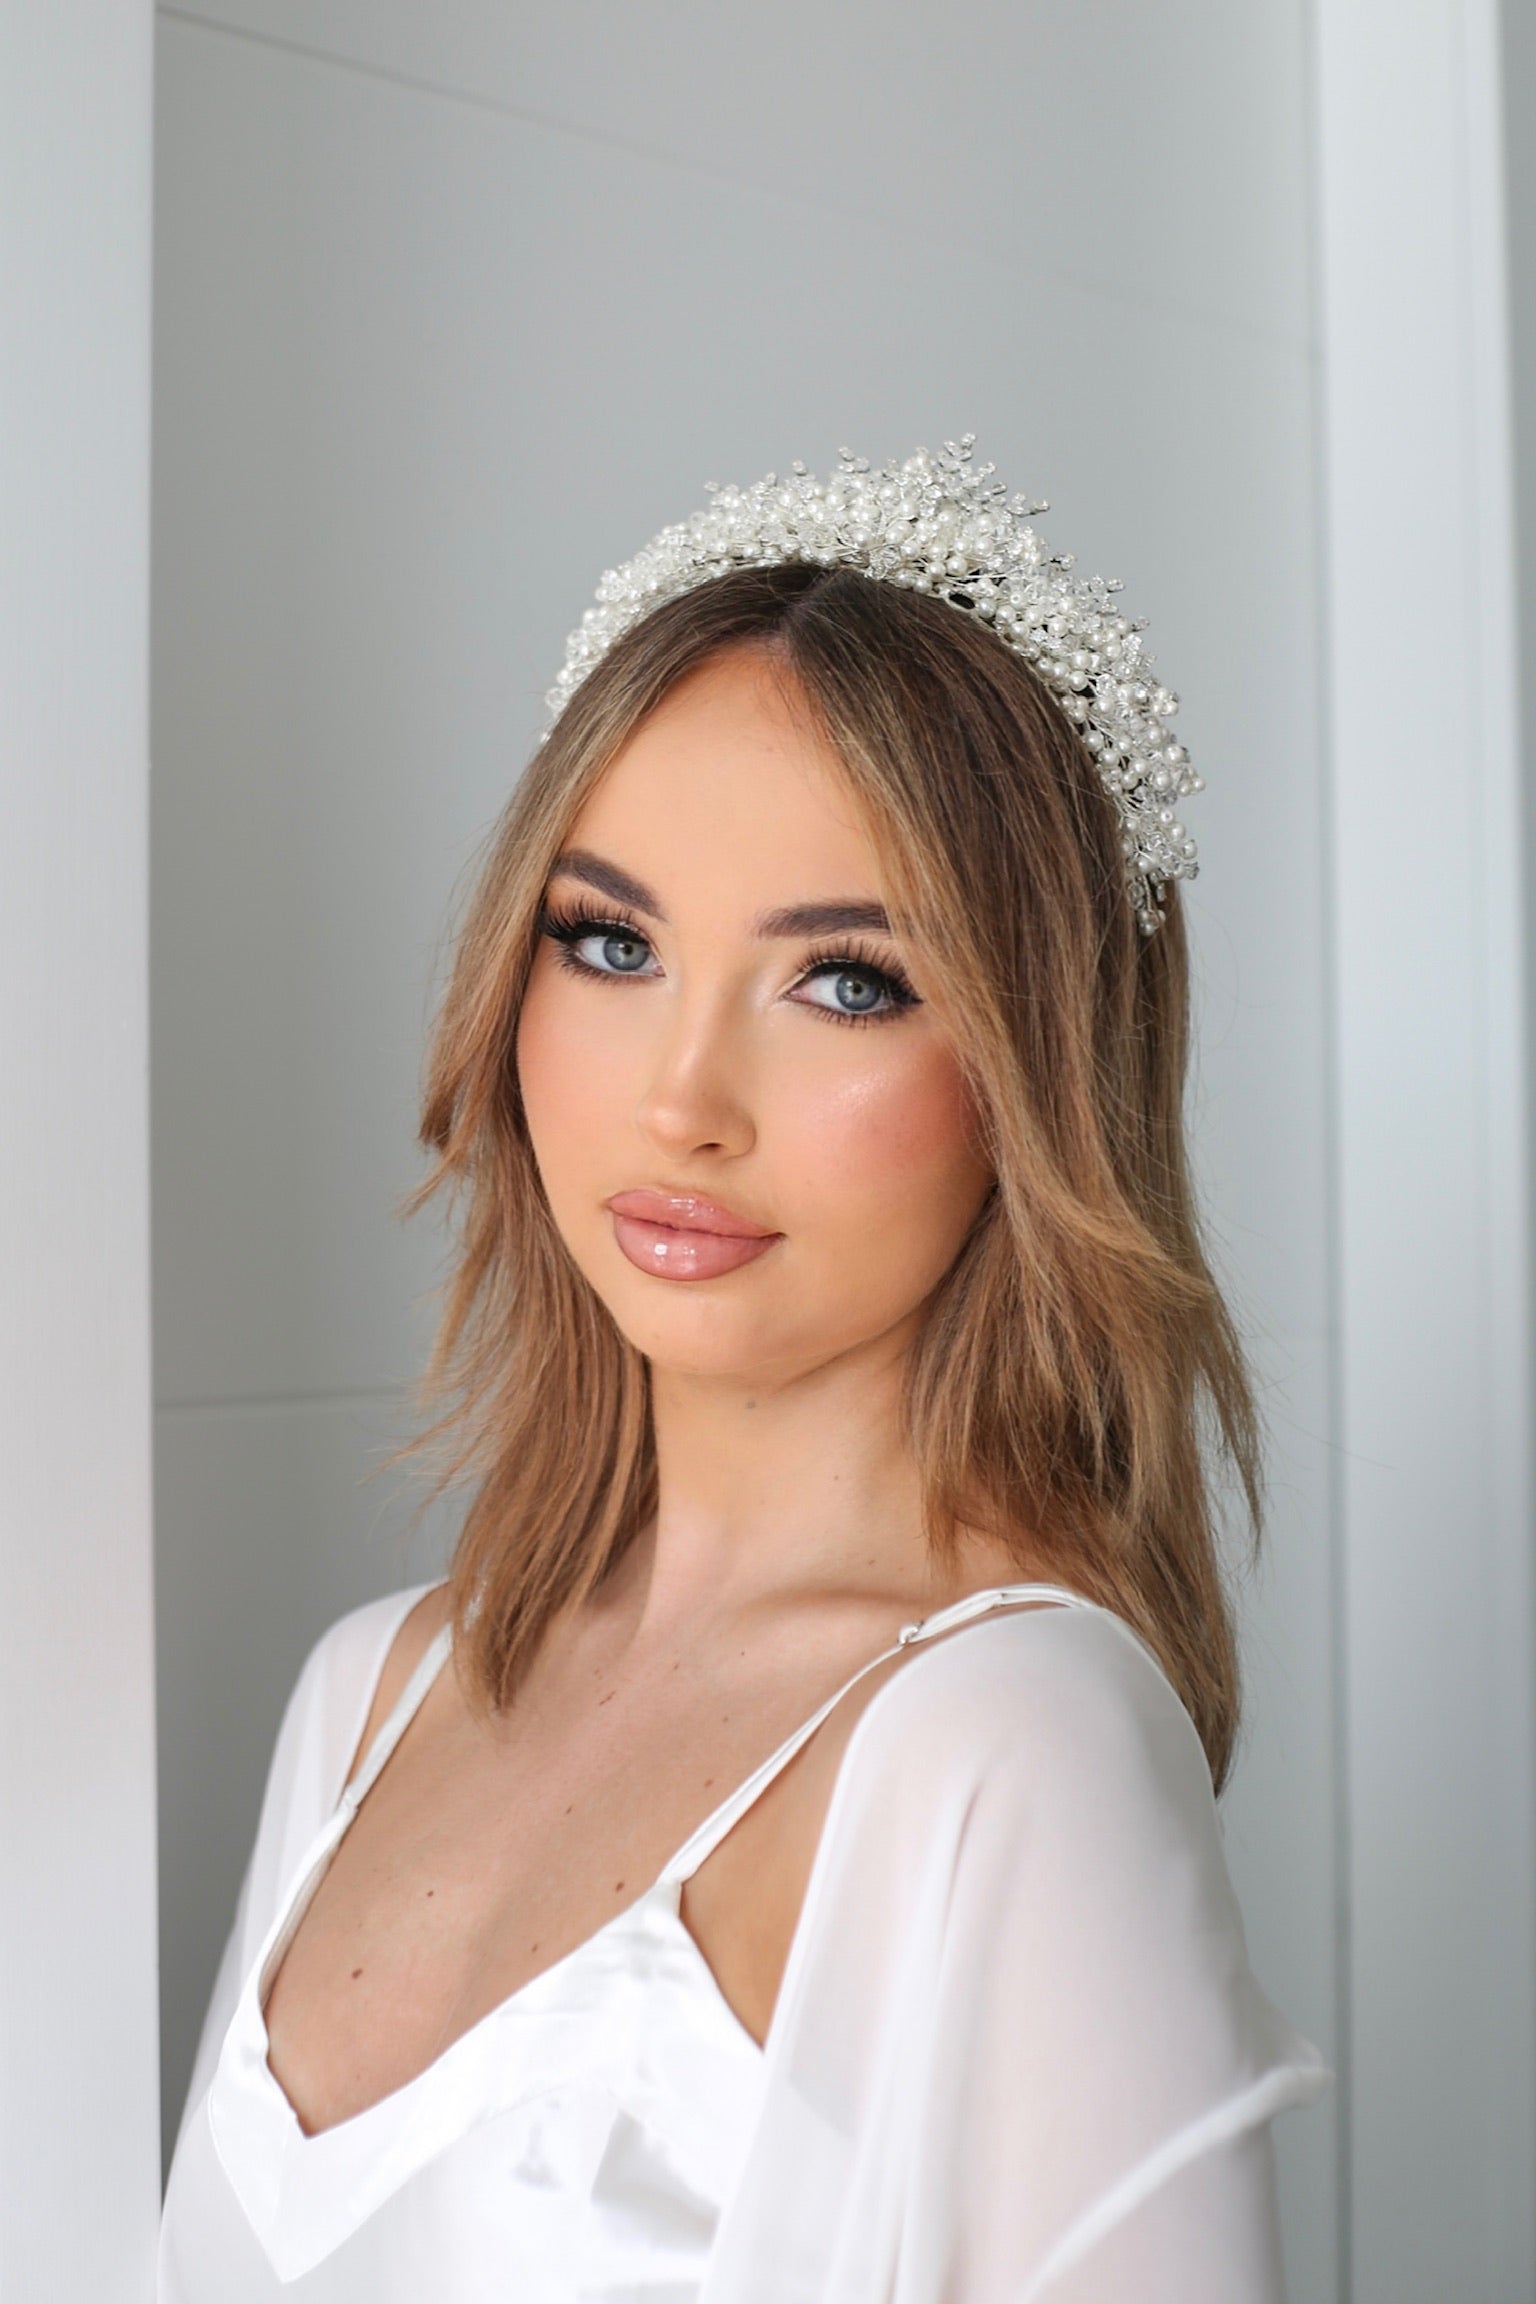 A stunning bride in a white Dilara tiara with crystals and pearls